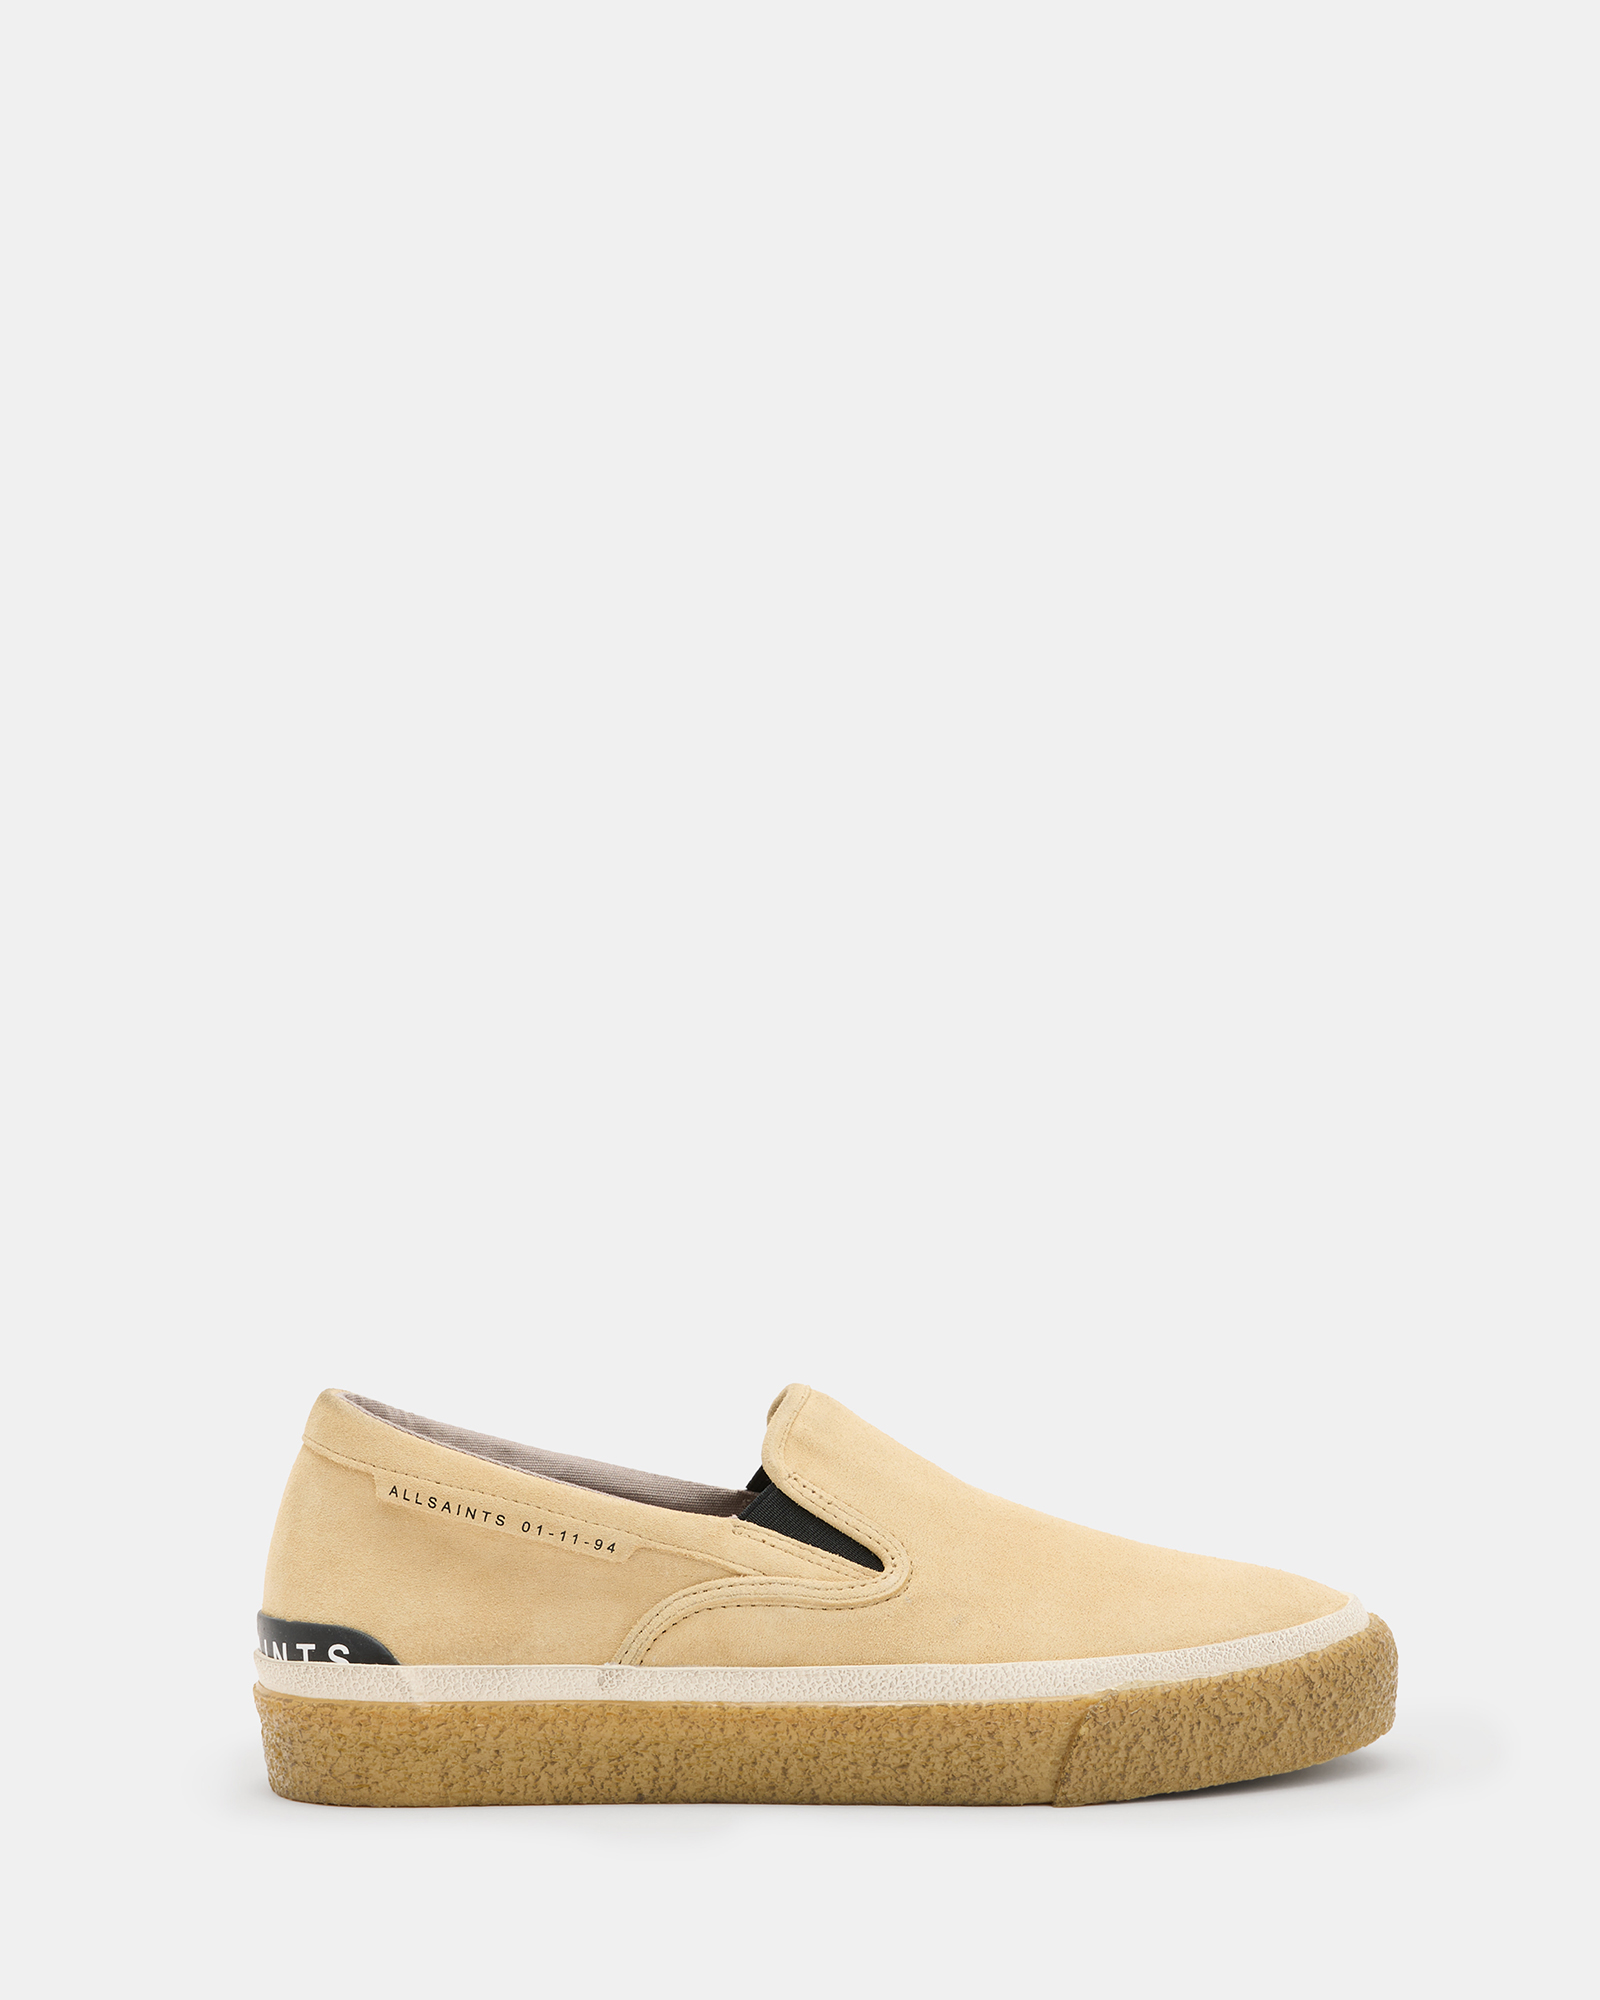 AllSaints Navaho Suede Slip On Trainers